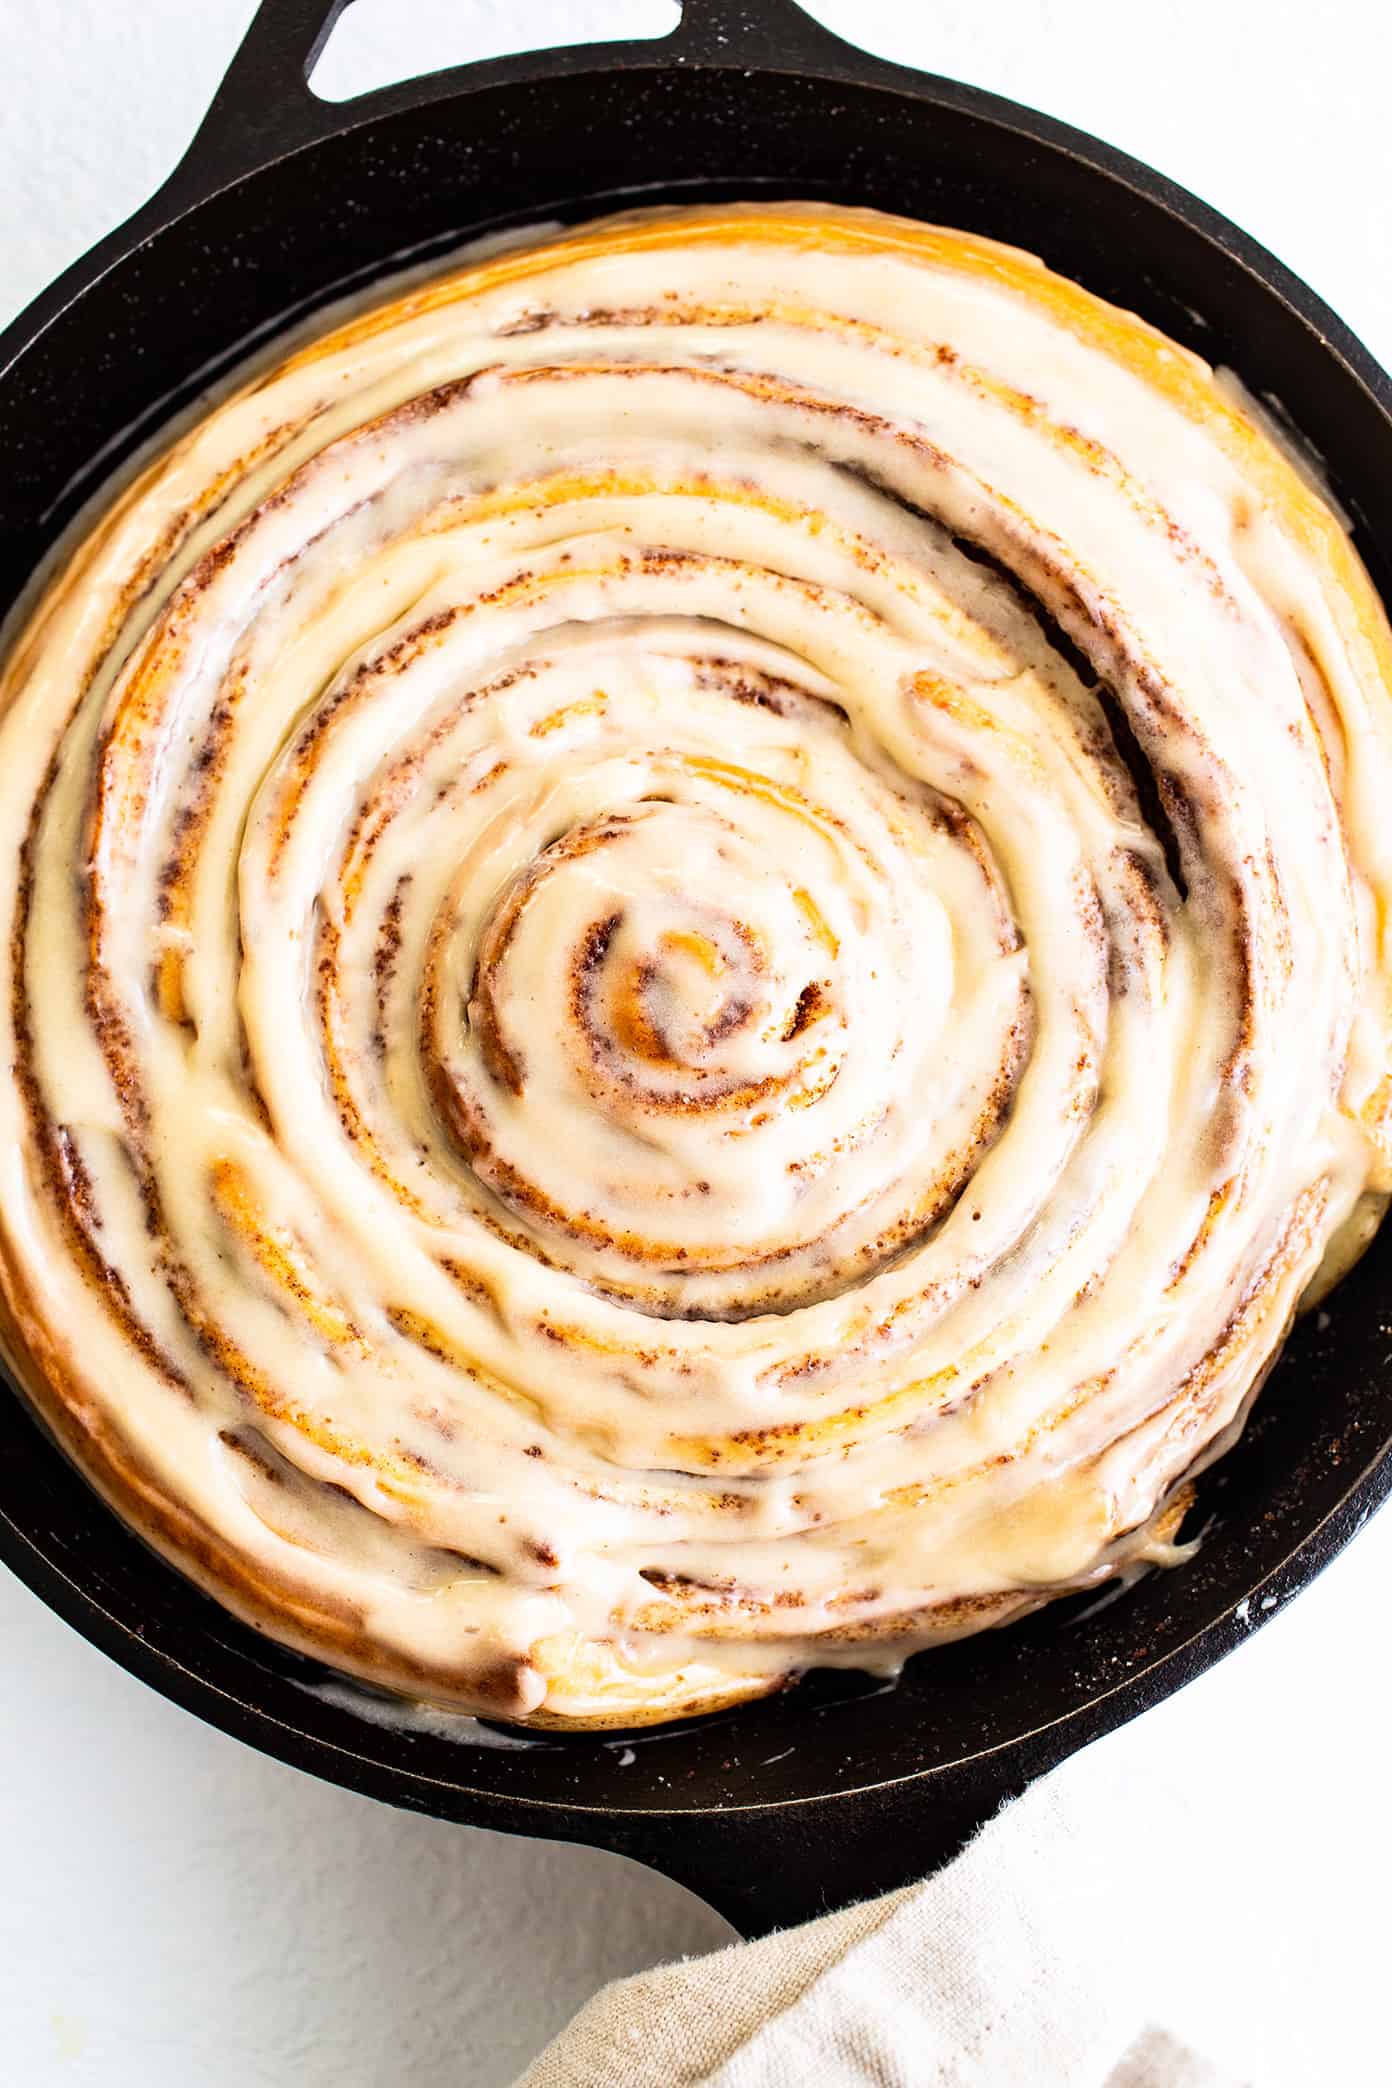 Giant Cinnamon Roll in Skillet with Cream Cheese Icing